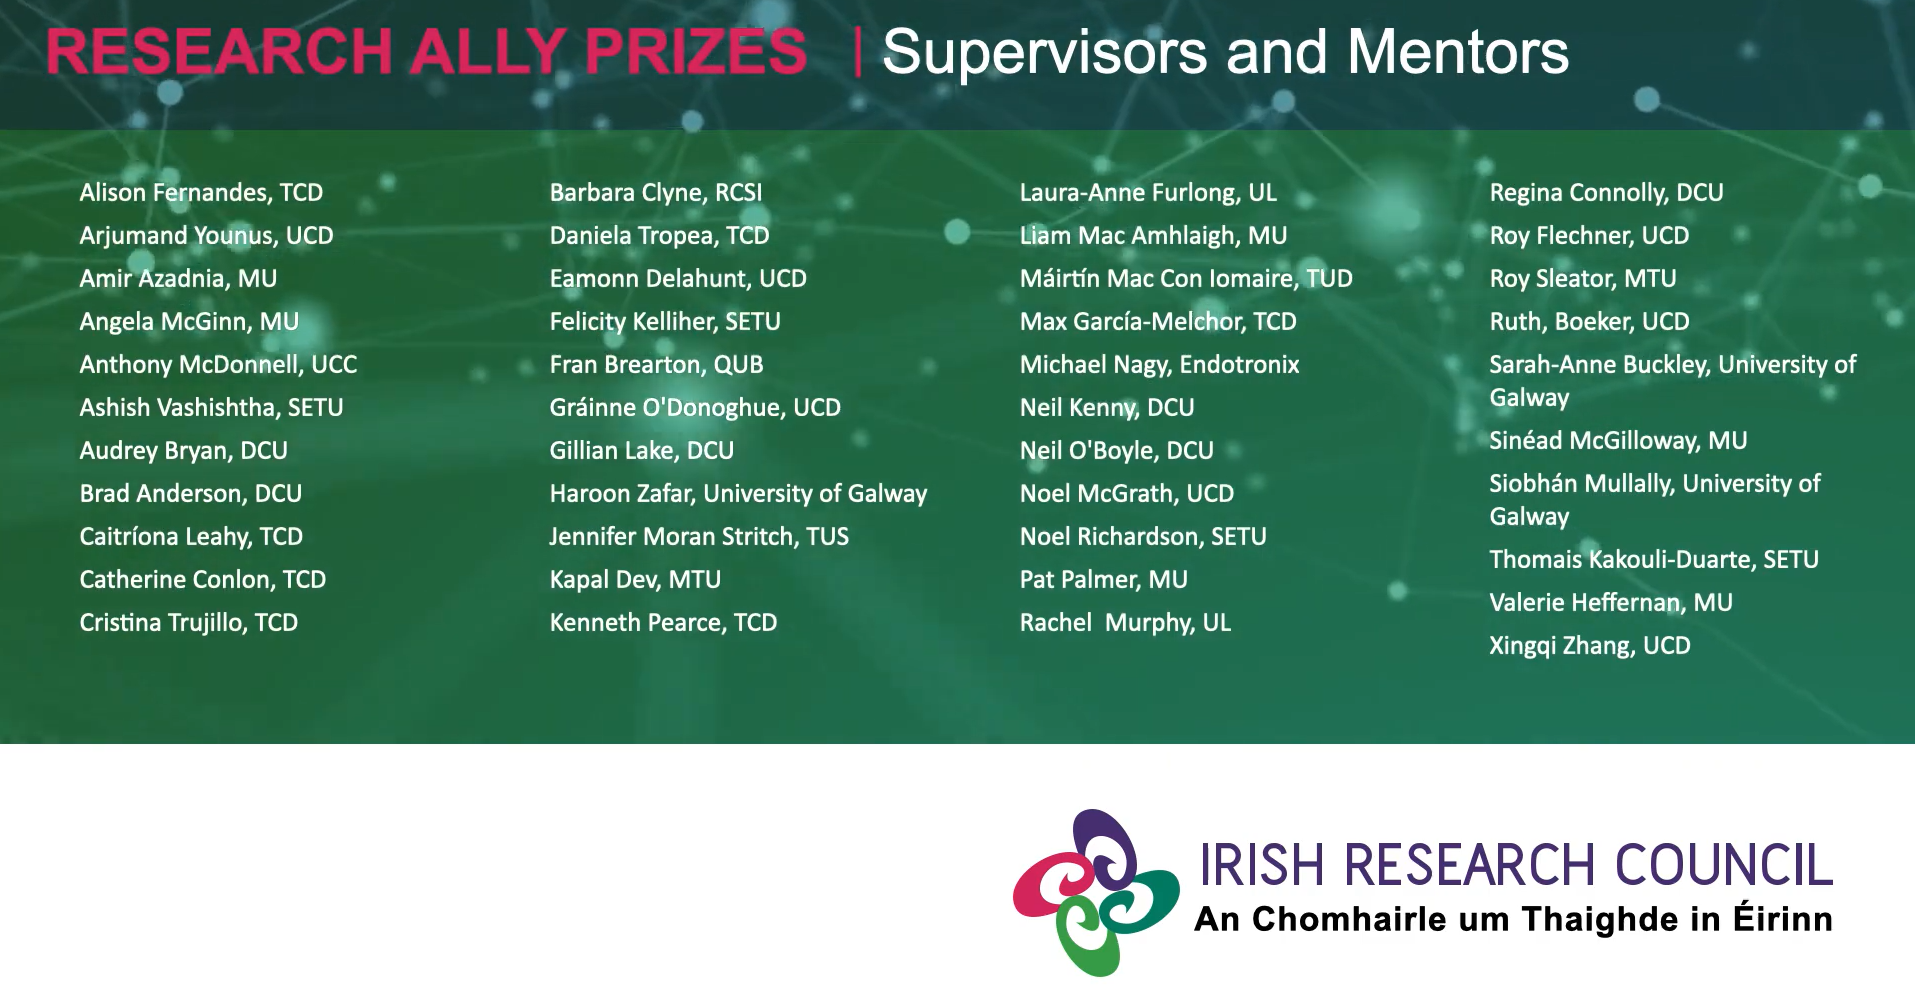 Research ally winners 2022